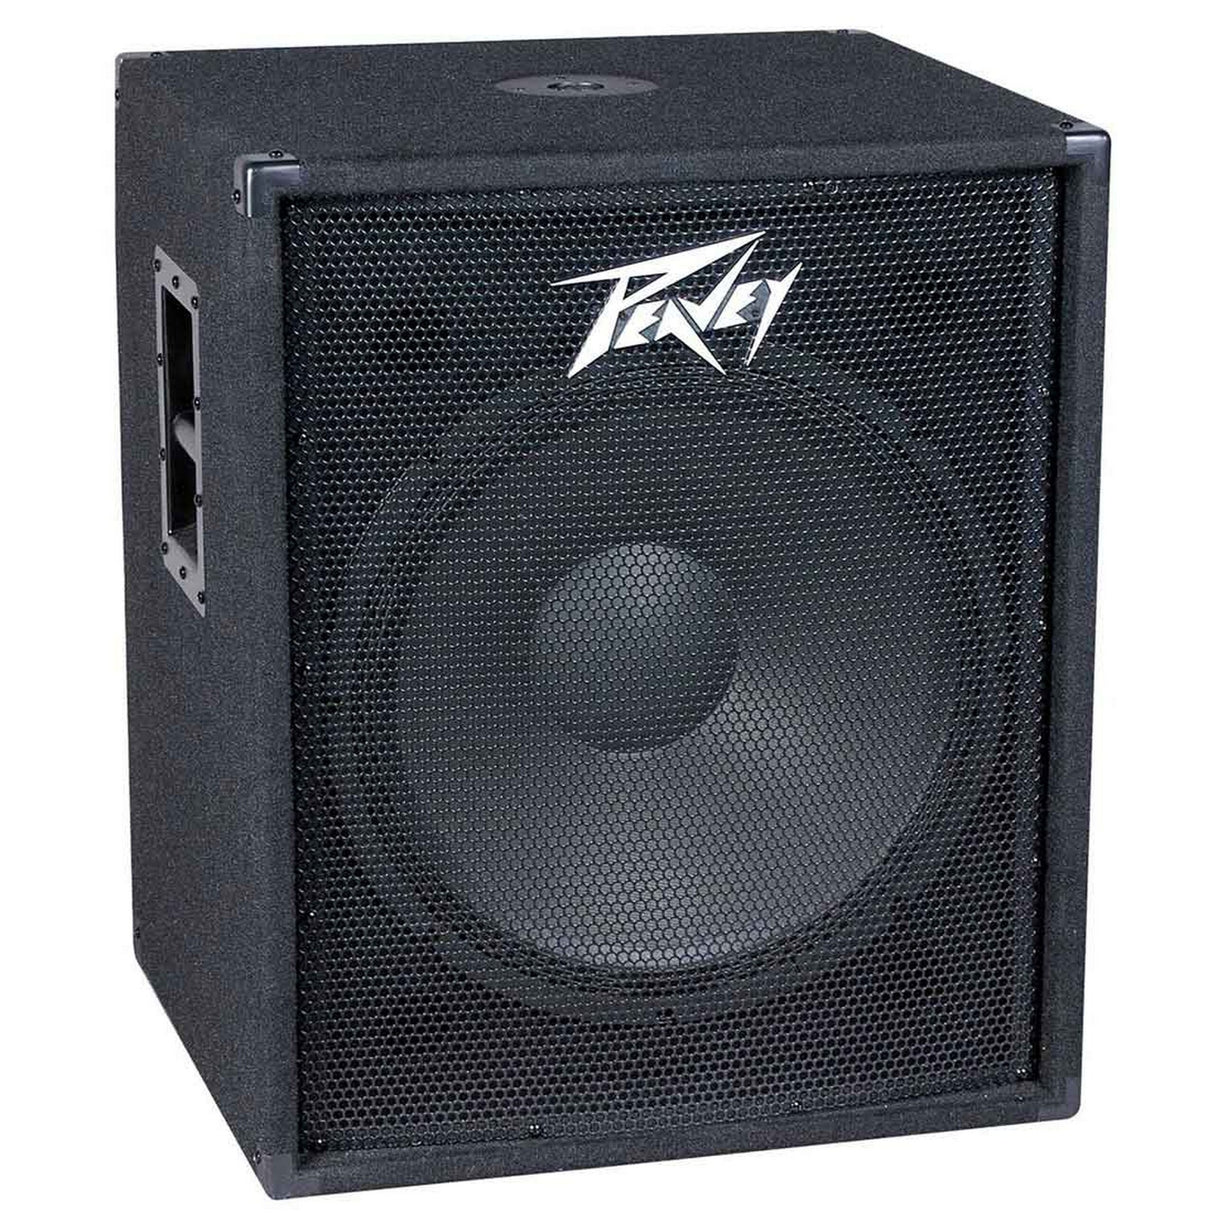 Peavey PV 118 Subwoofer, 18 Inch